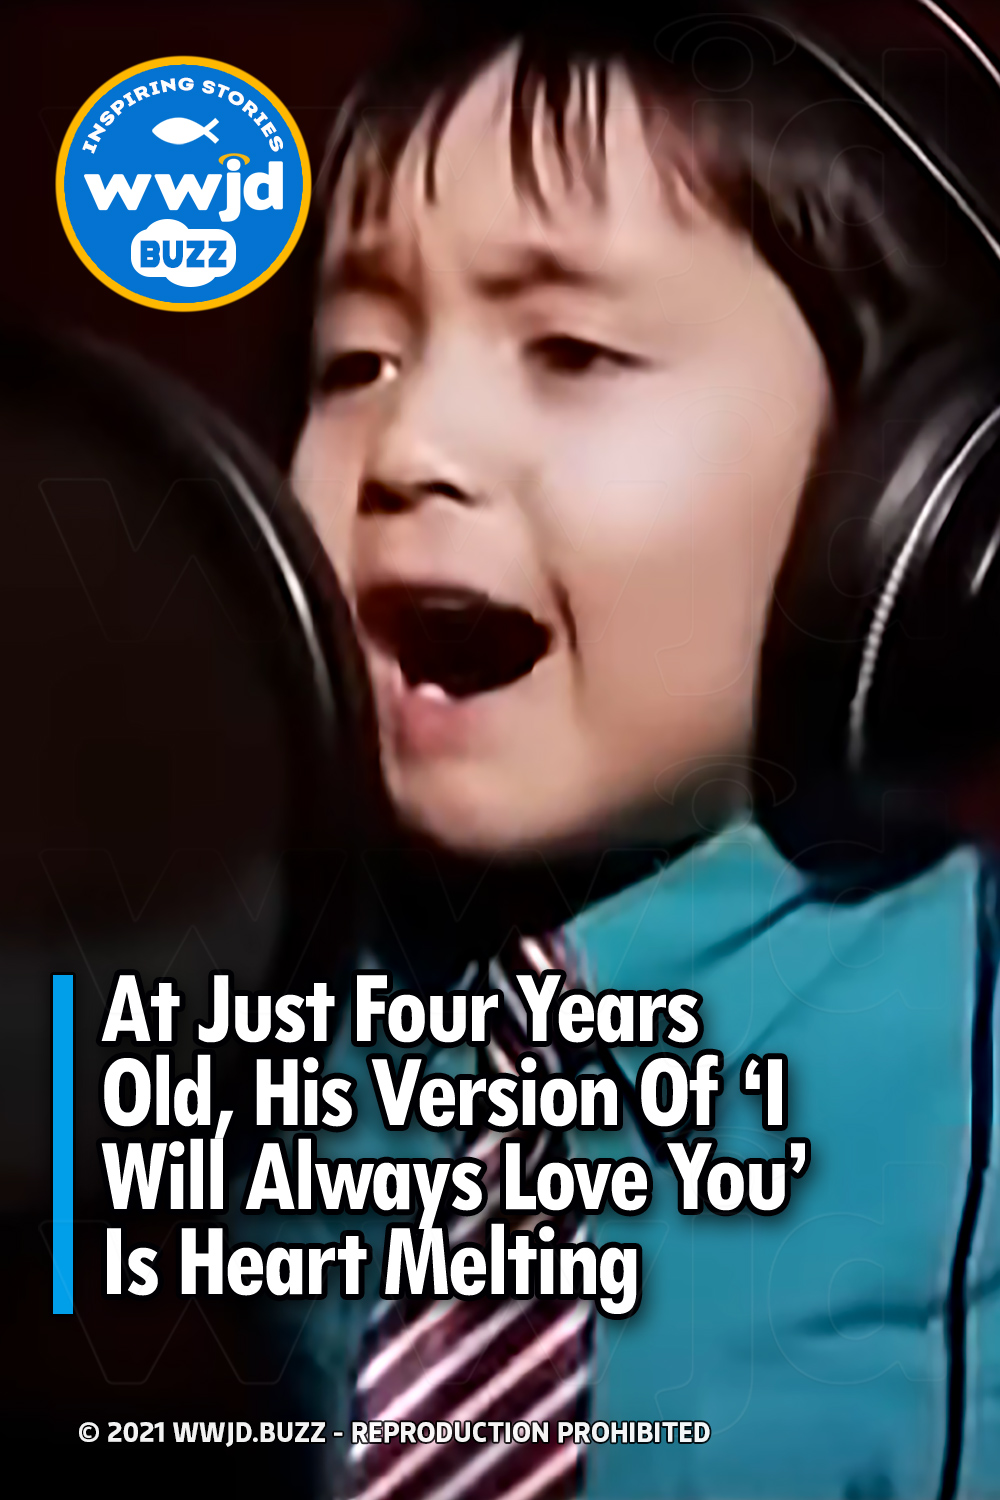 At Just Four Years Old, His Version Of ‘I Will Always Love You’ Is Heart Melting